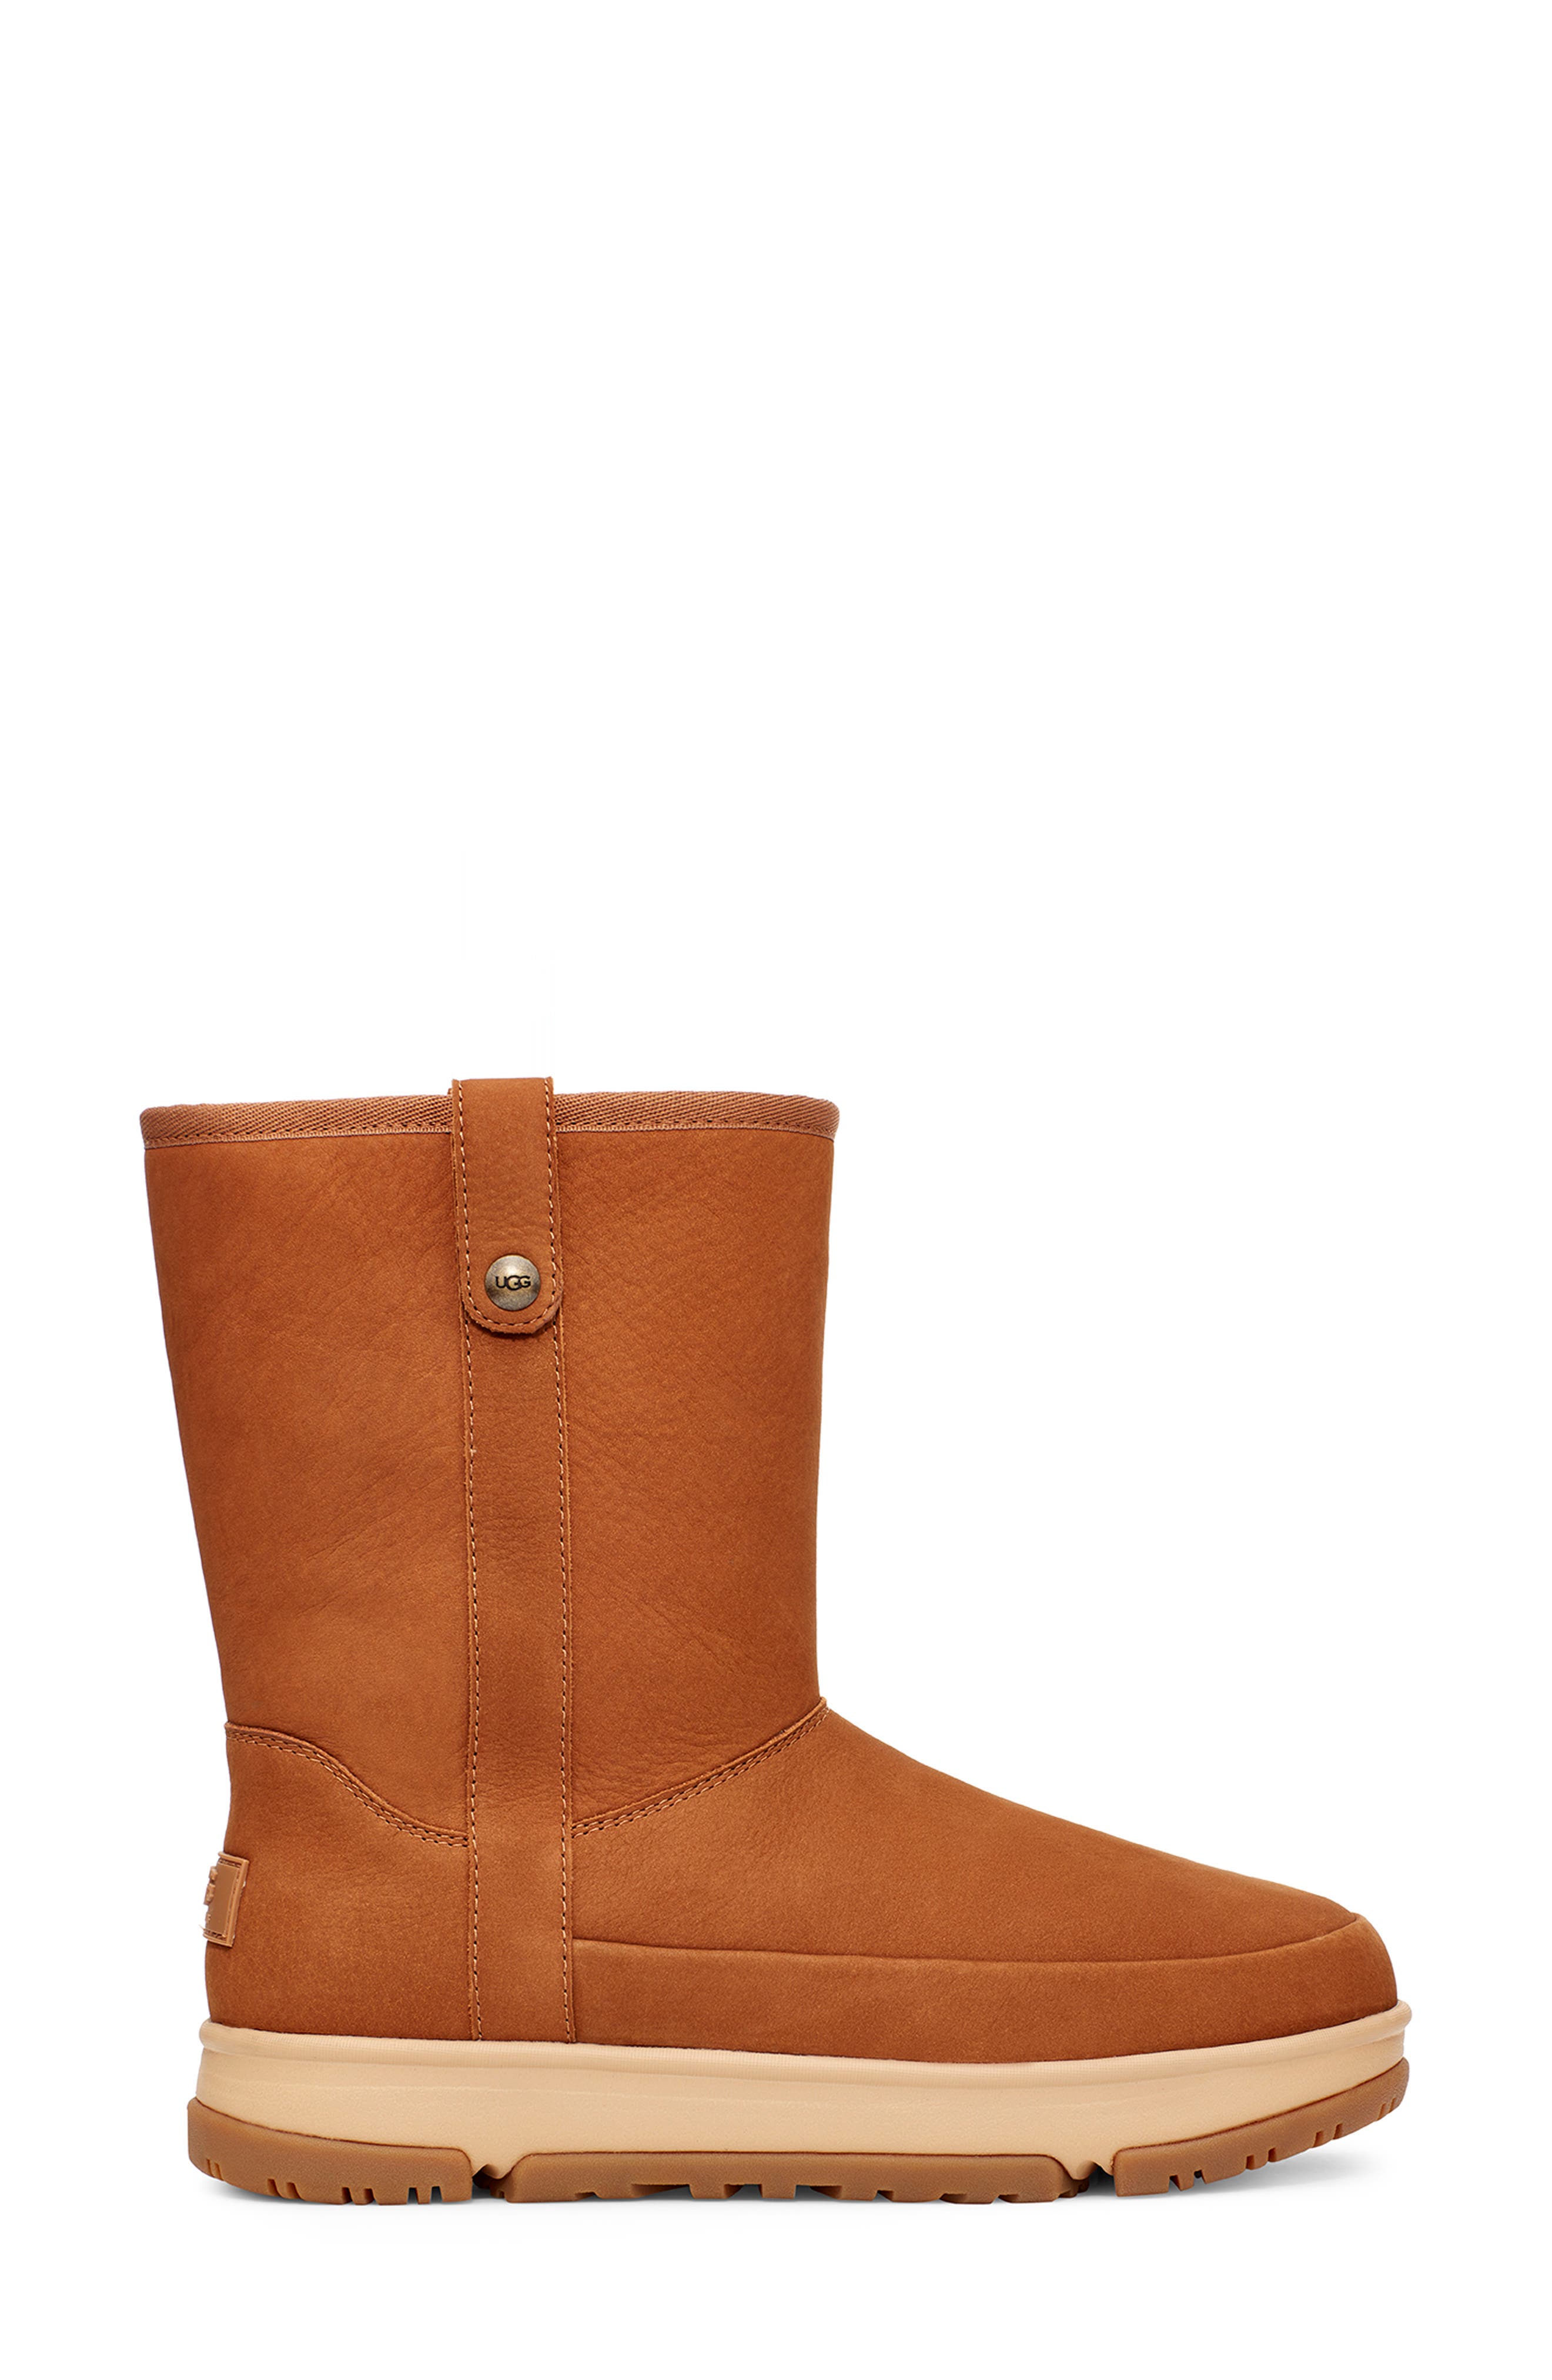 ugg boots womens nordstrom